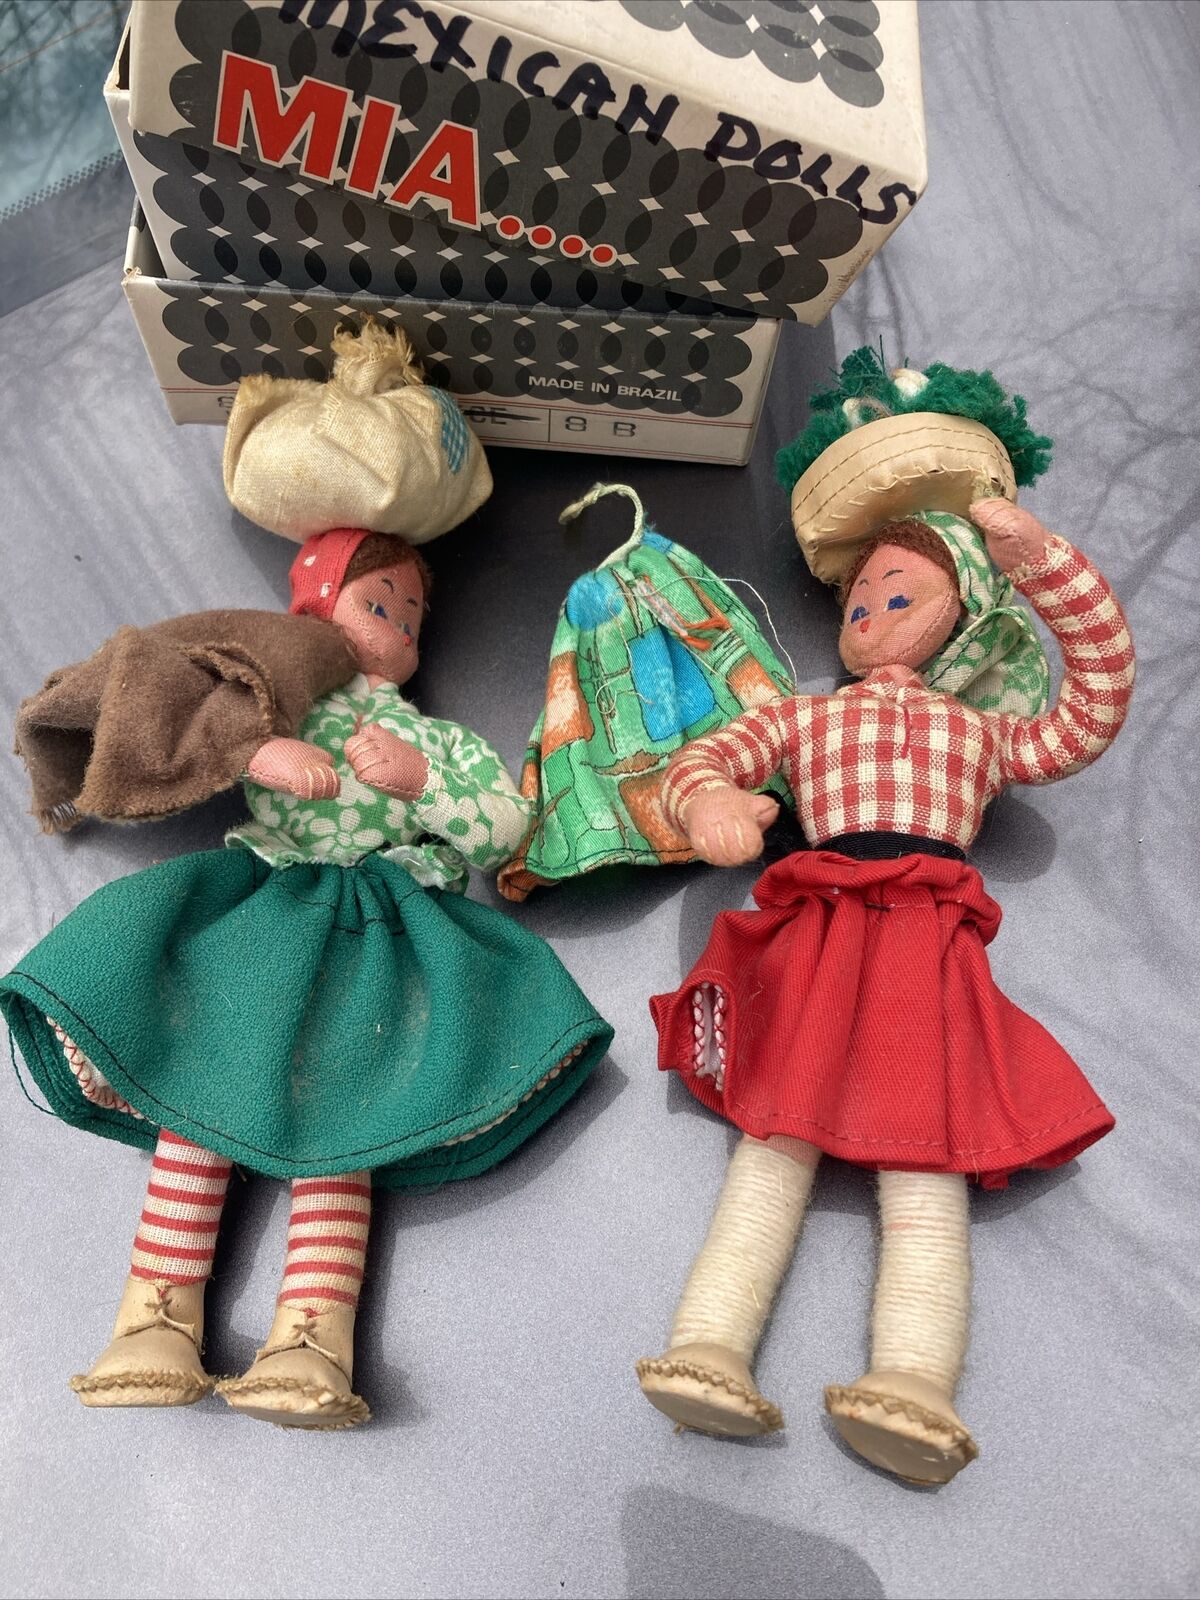 x2 Vintage Handmade Mexican Latin Dolls Girls Amazing Attention To Detail 